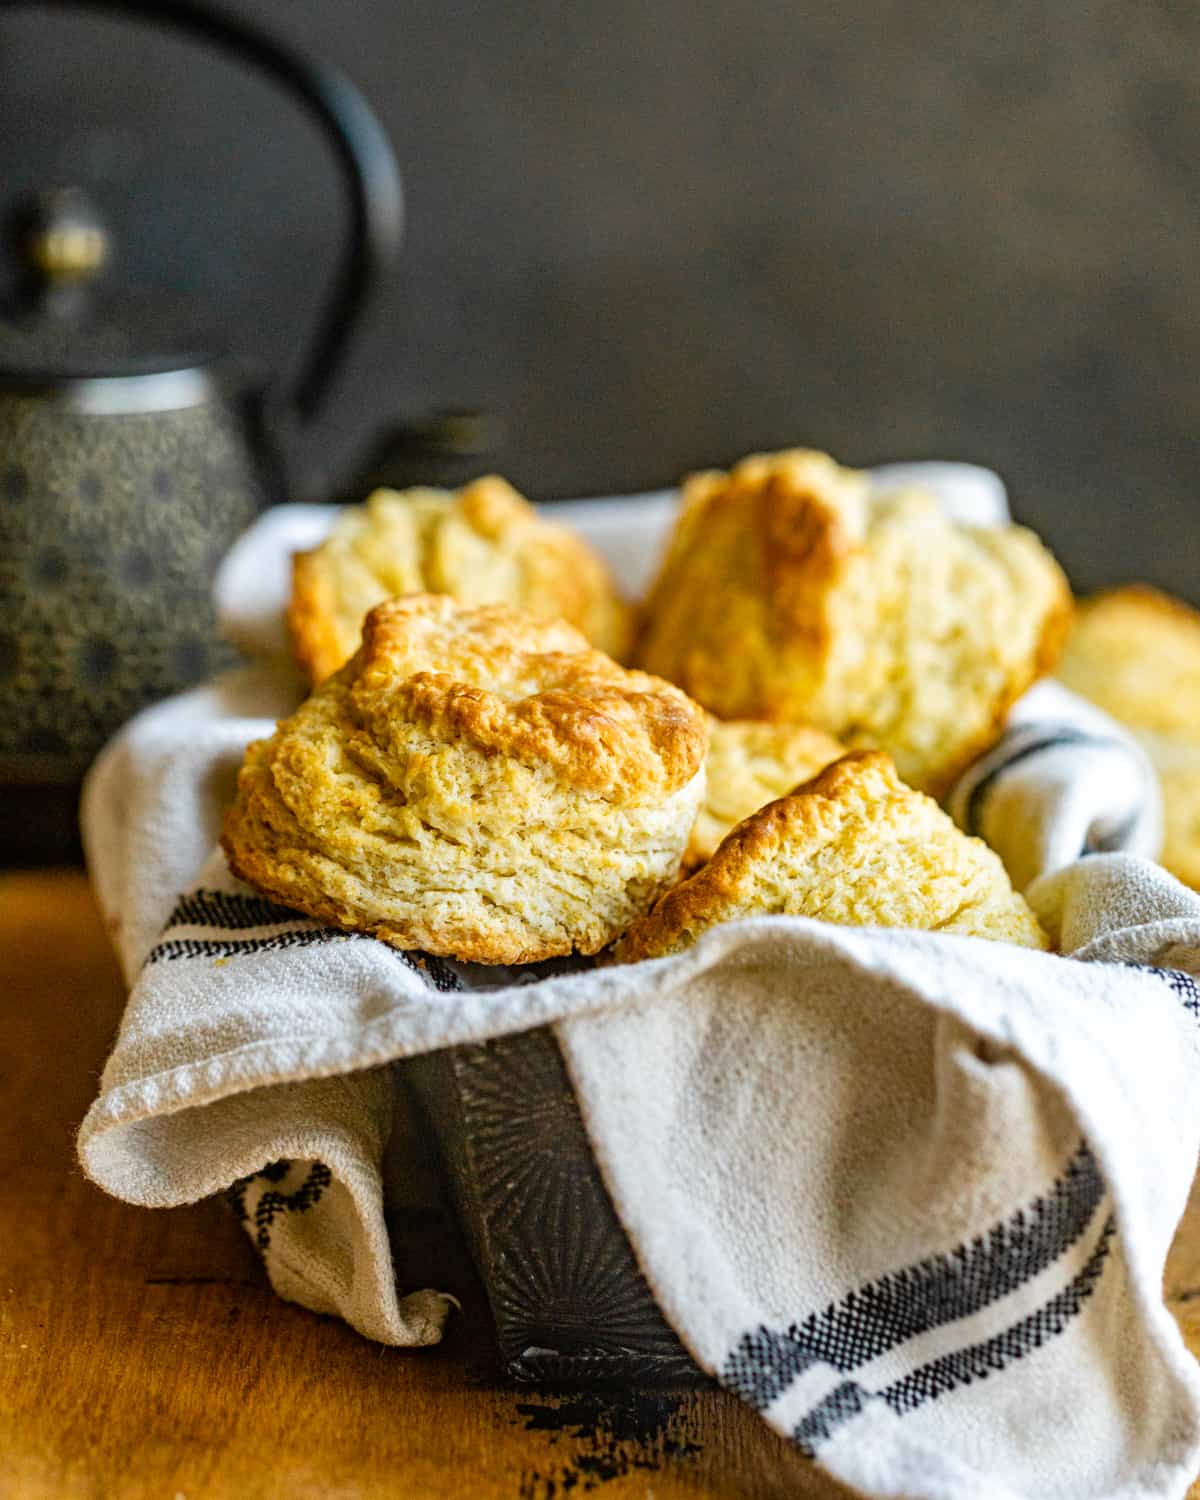 homemade biscuits in a basket.